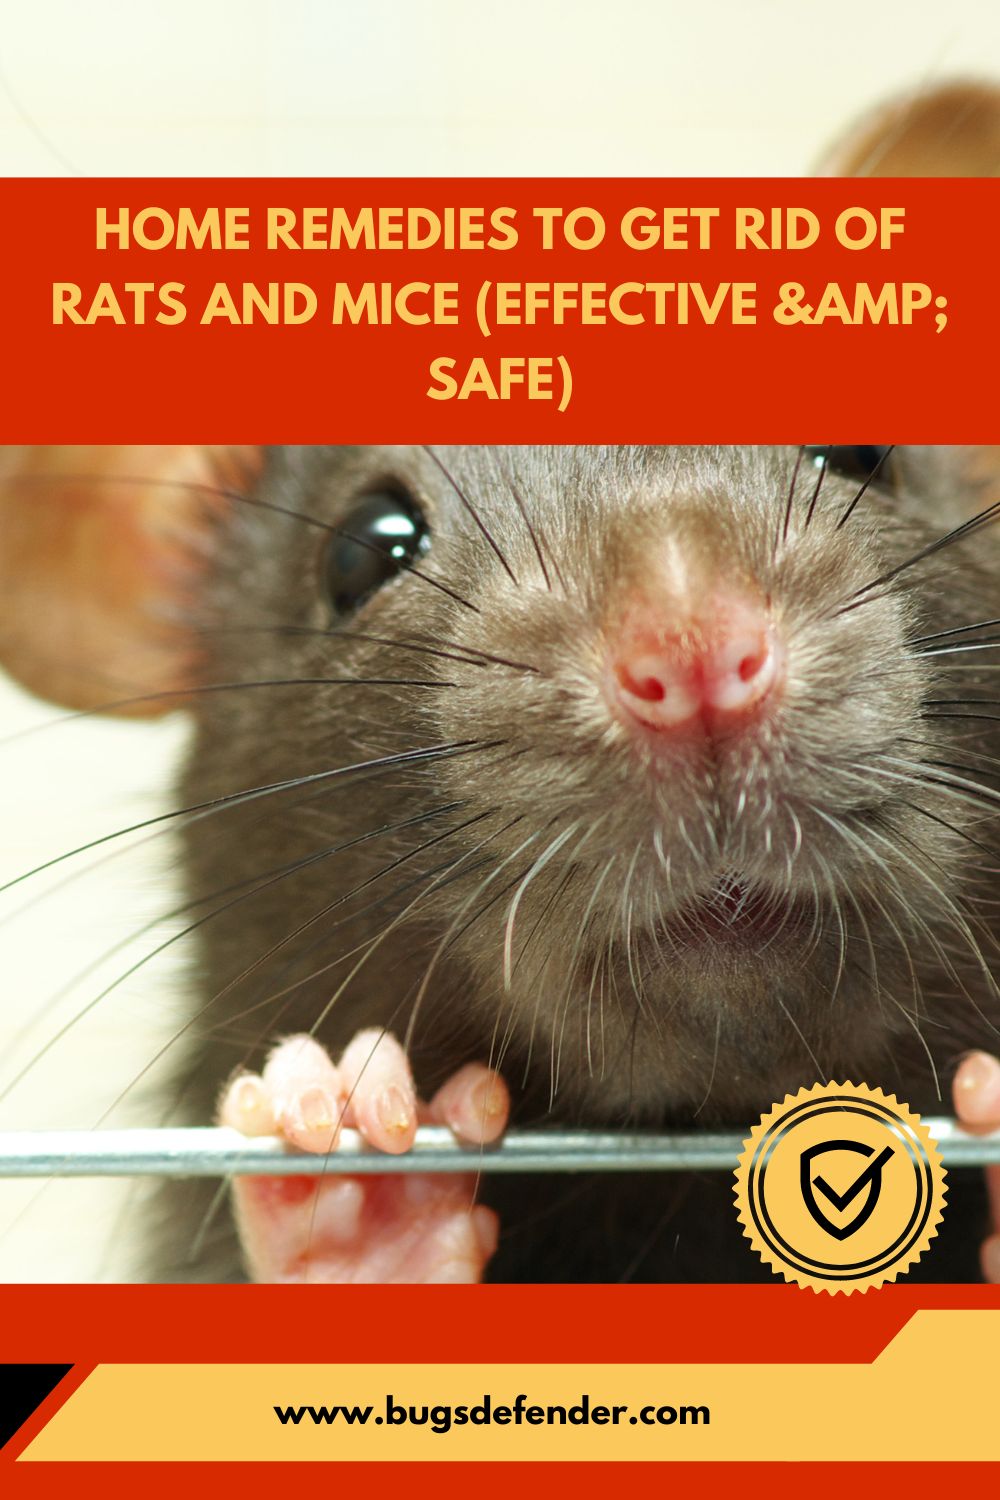 Home Remedies to Get Rid of Rats and Mice (Effective & Safe) pin1